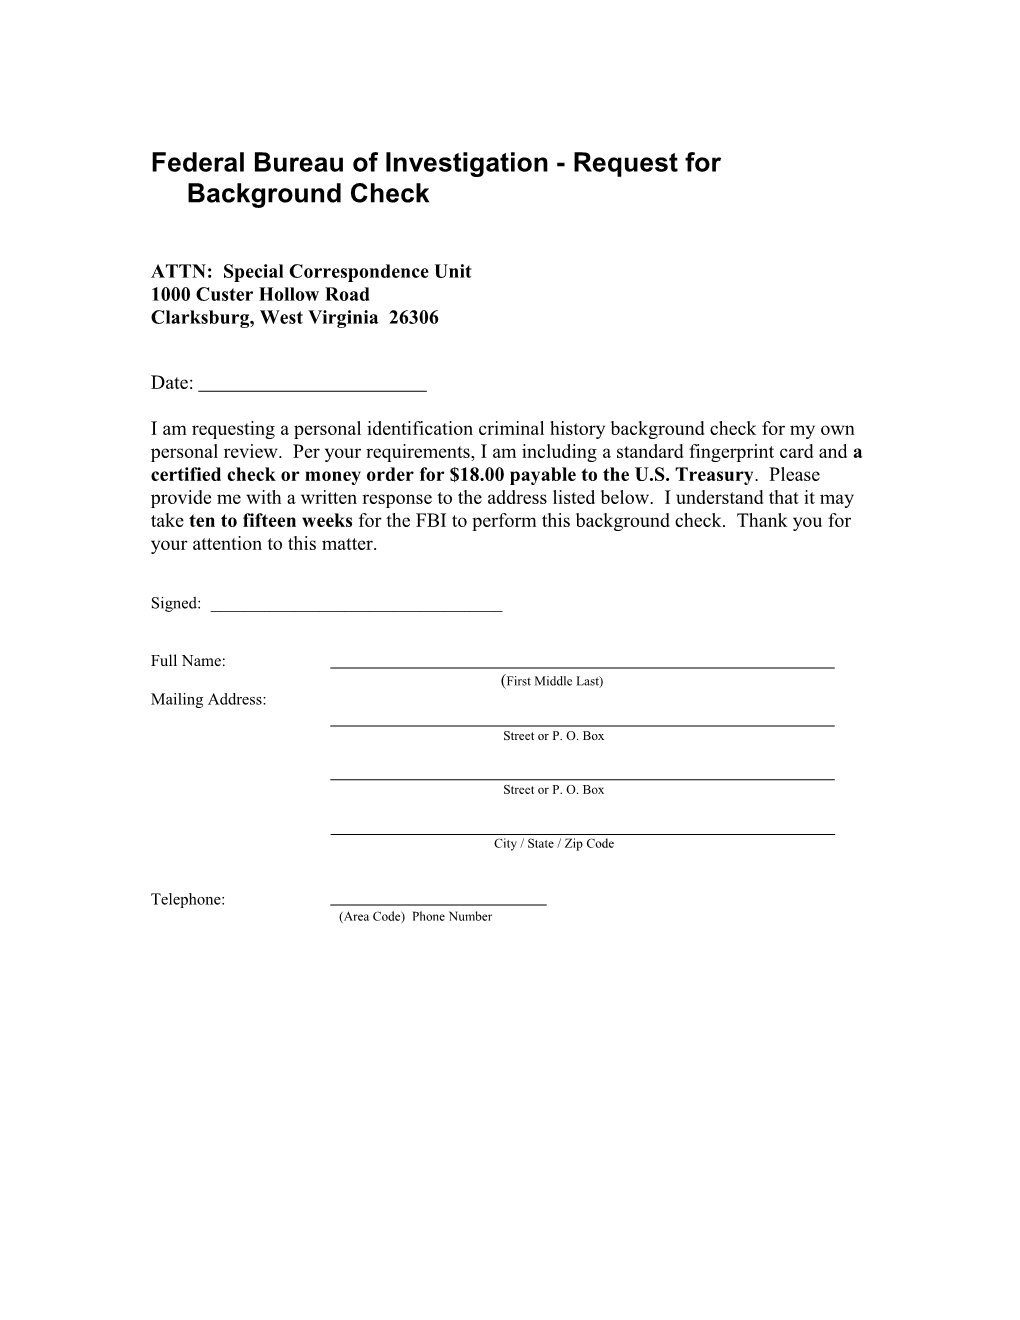 Federal Bureau of Investigation - Request for Background Check